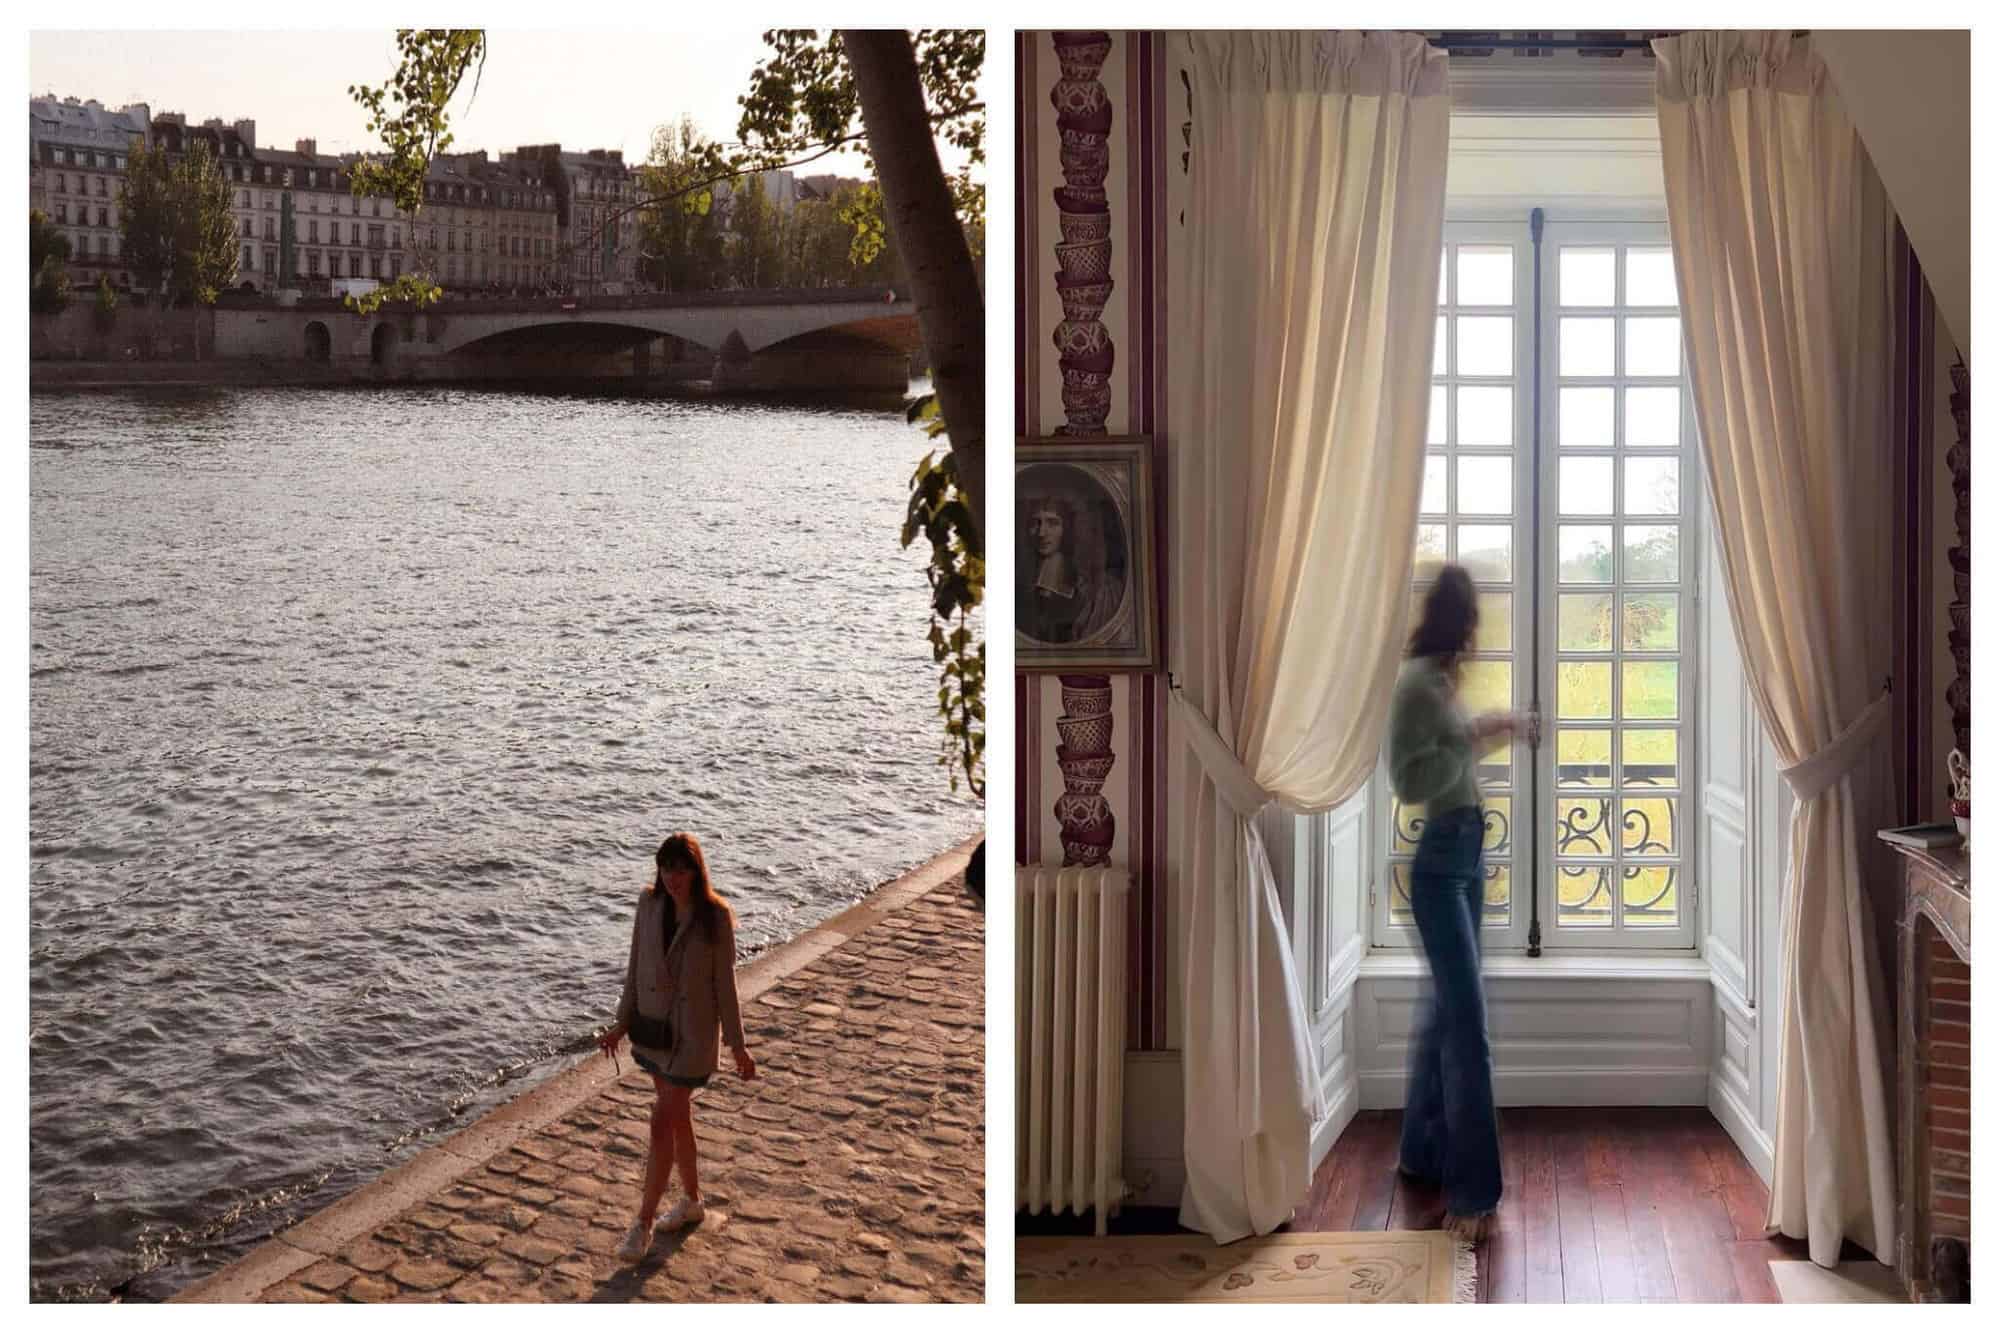 Left: A woman walks alone in the Quai of the Seine. Right: The figure of a woman is blurred as she stands in front of a window. 